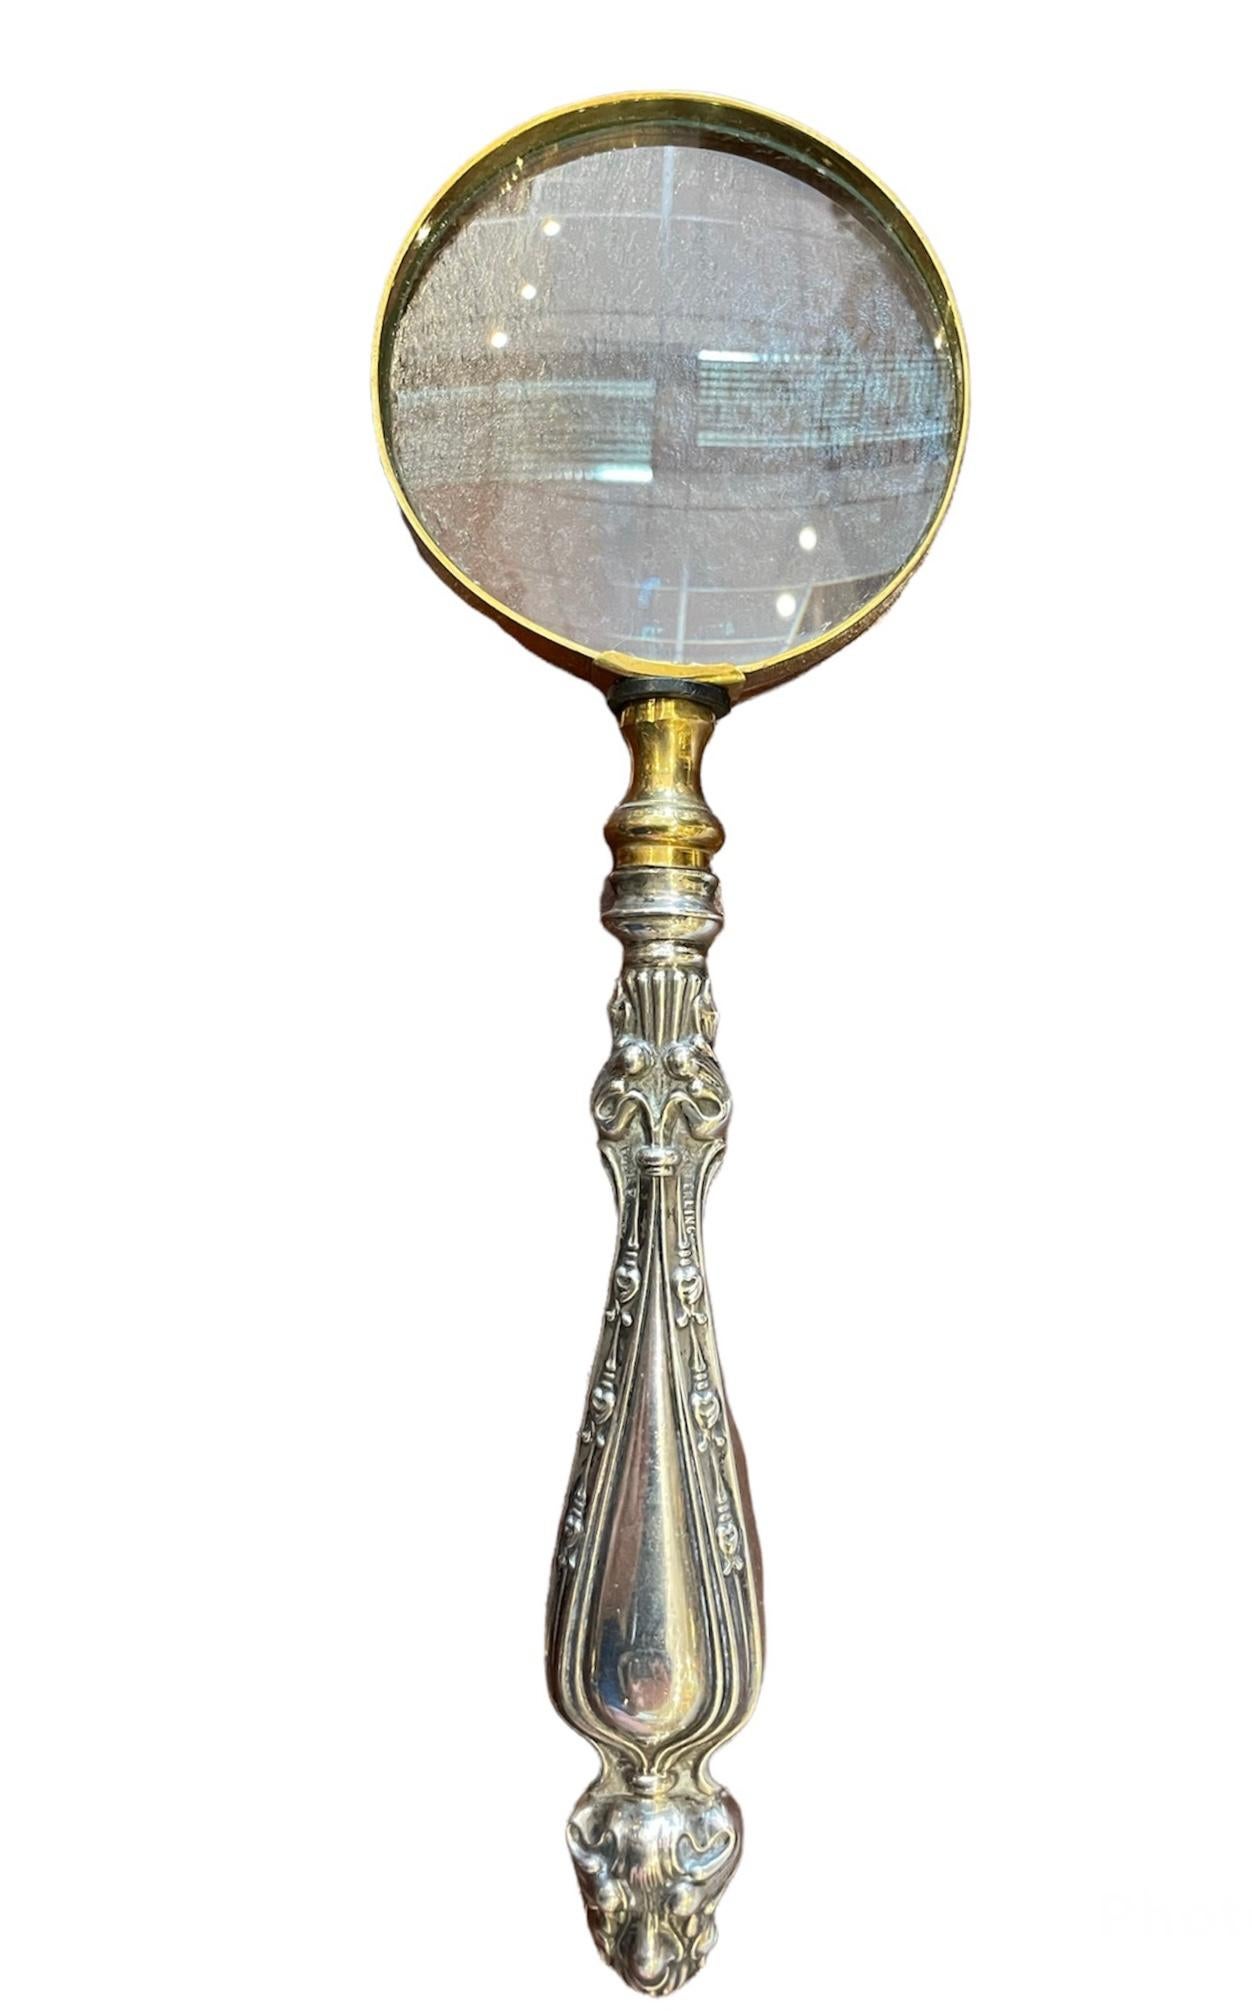 This is a sterling silver and metal magnifying glass. The magnifying glass area is round shaped and framed with a yellow metal. The handle is made of sterling silver and shaped as a drop. It is adorned with the relief of multiple layers of acanthus